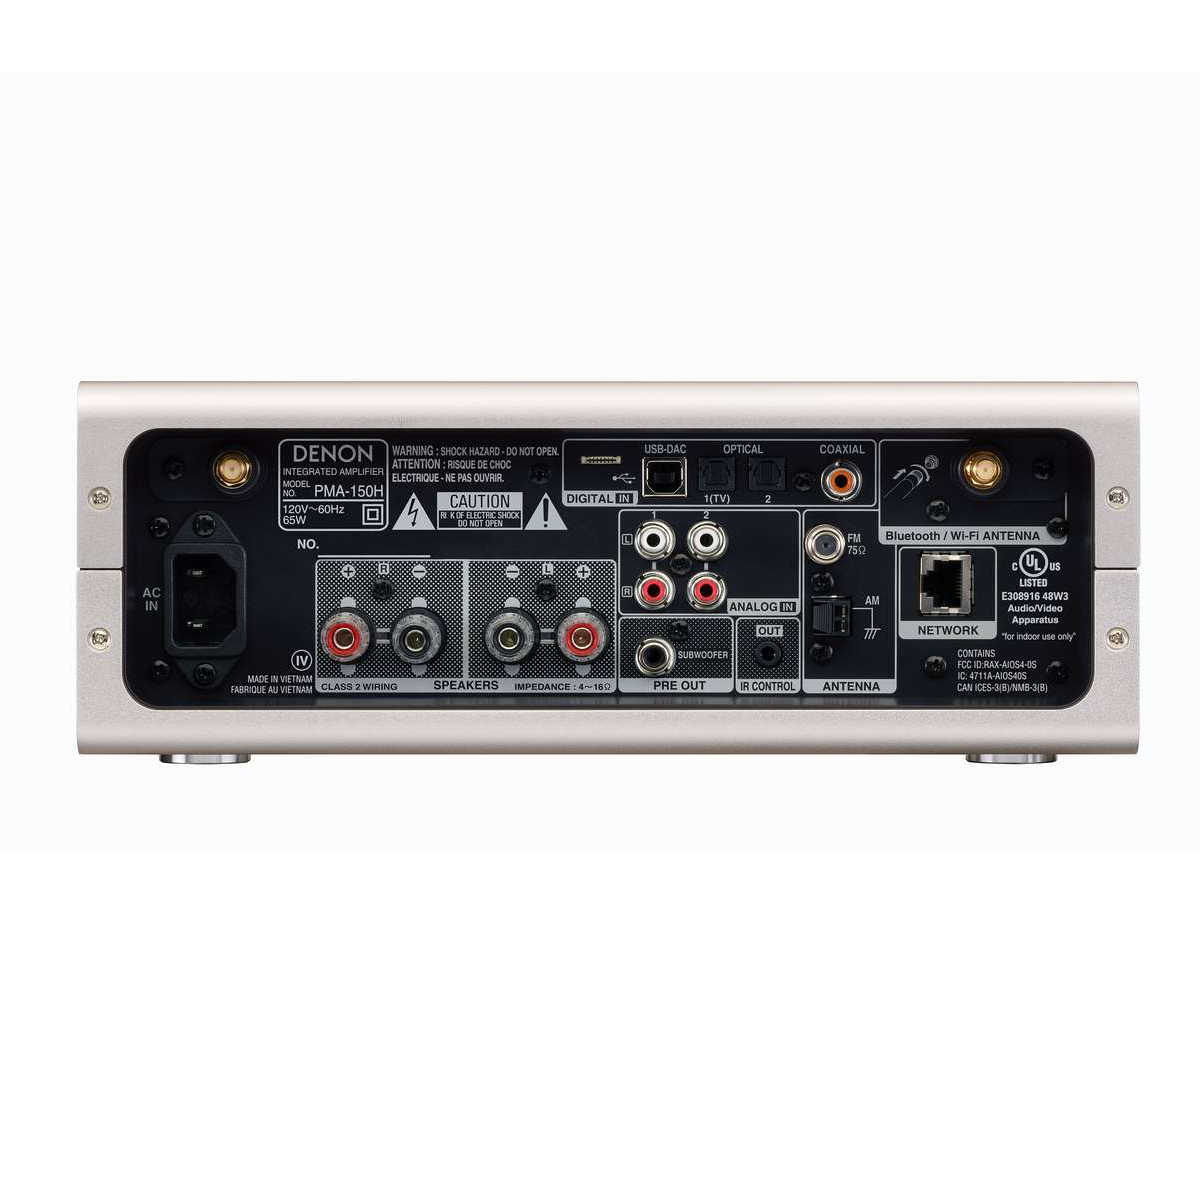 PMA-900HNE - Integrated Network Amplifier with HEOS® Built-in music  streaming